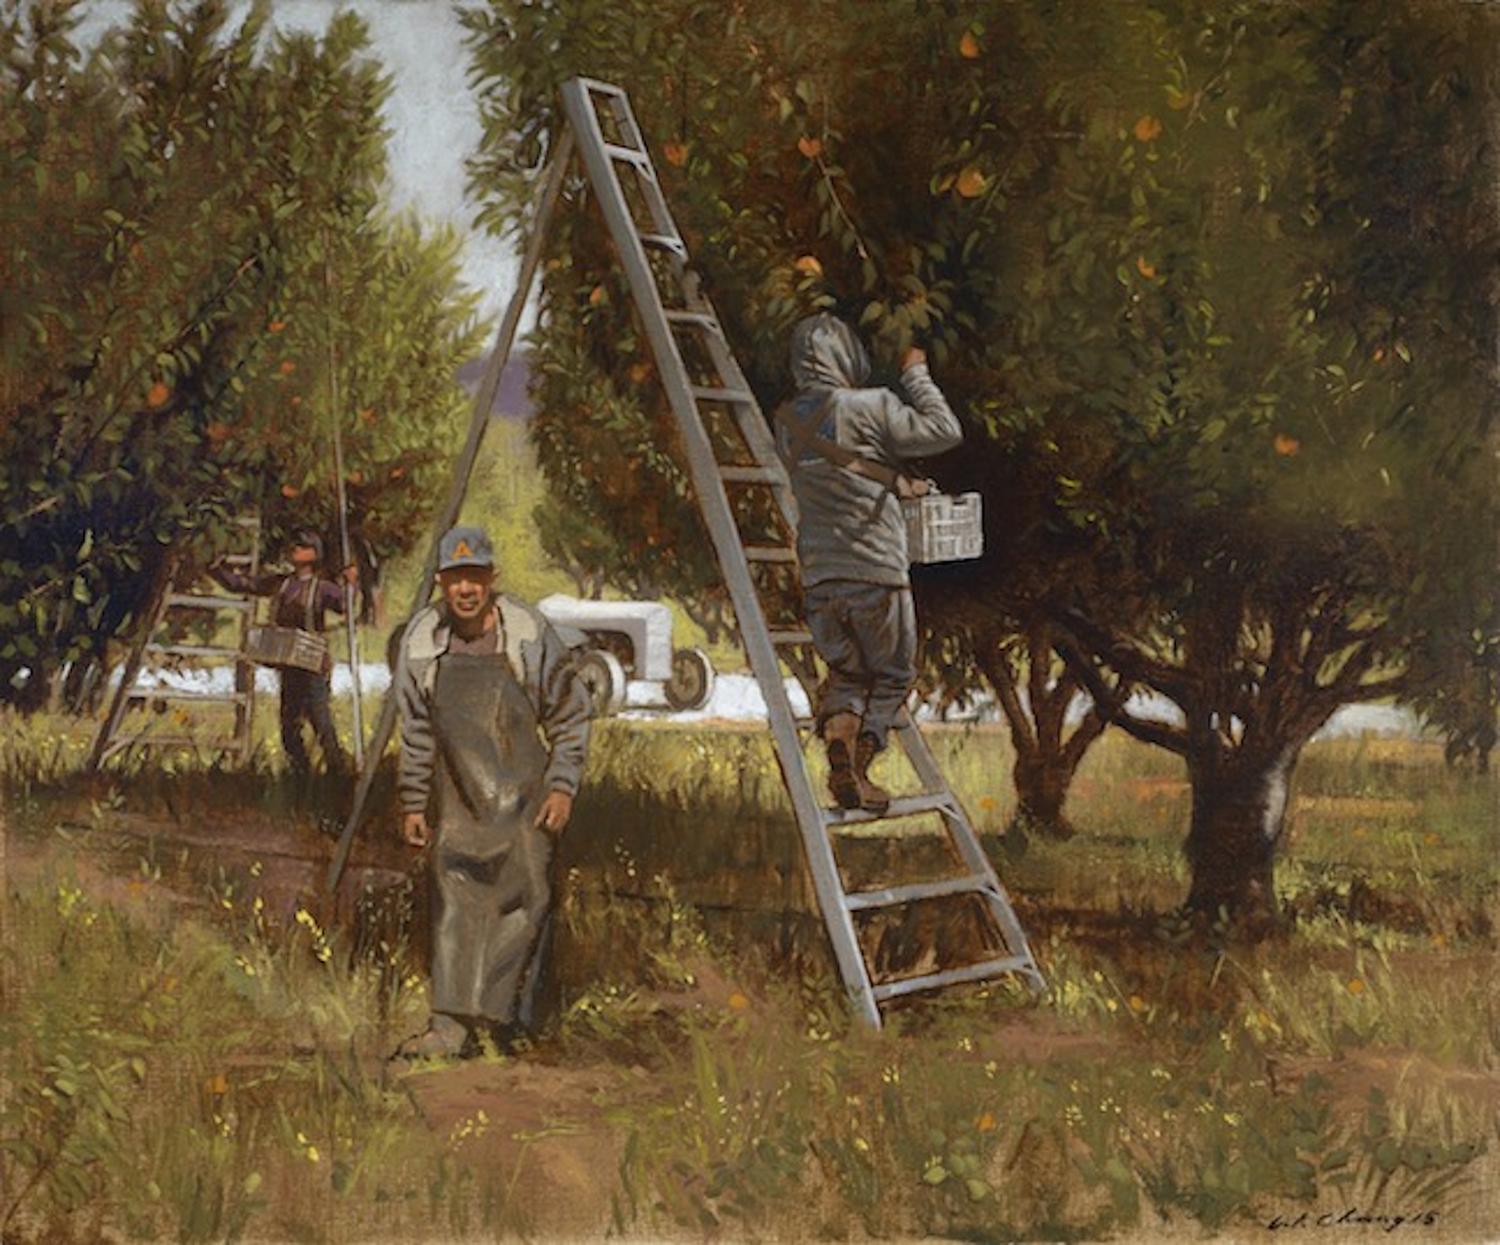 Orchard in July - Painting by Warren Chang